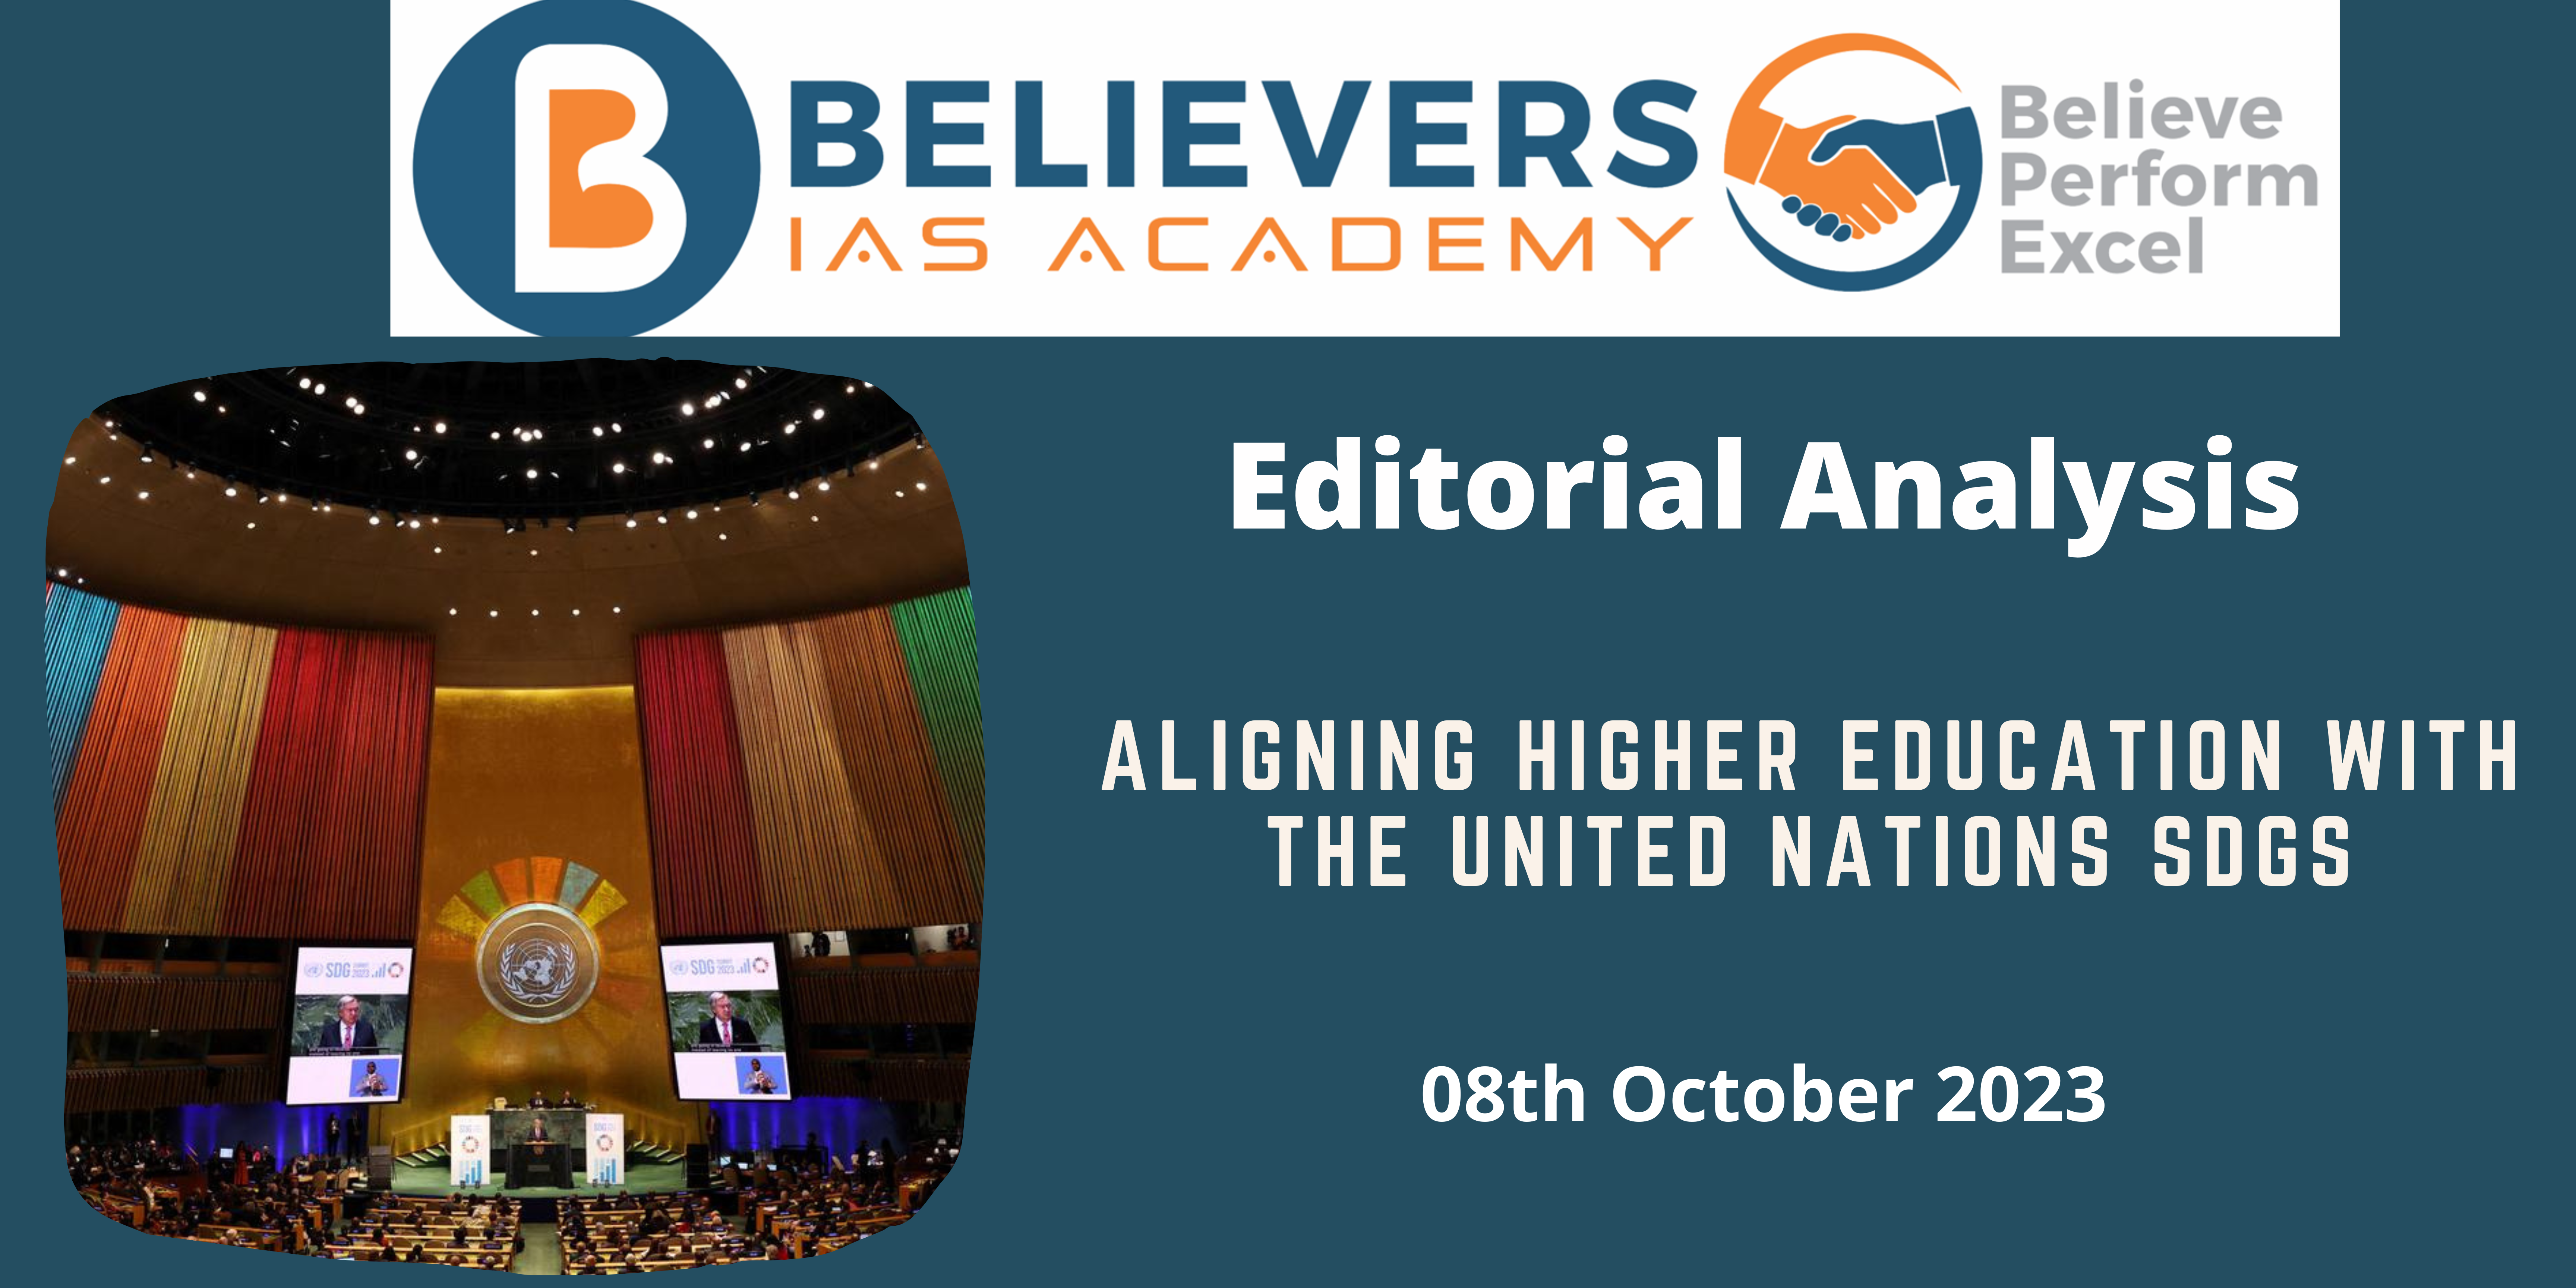 Aligning higher education with the United Nations SDGs